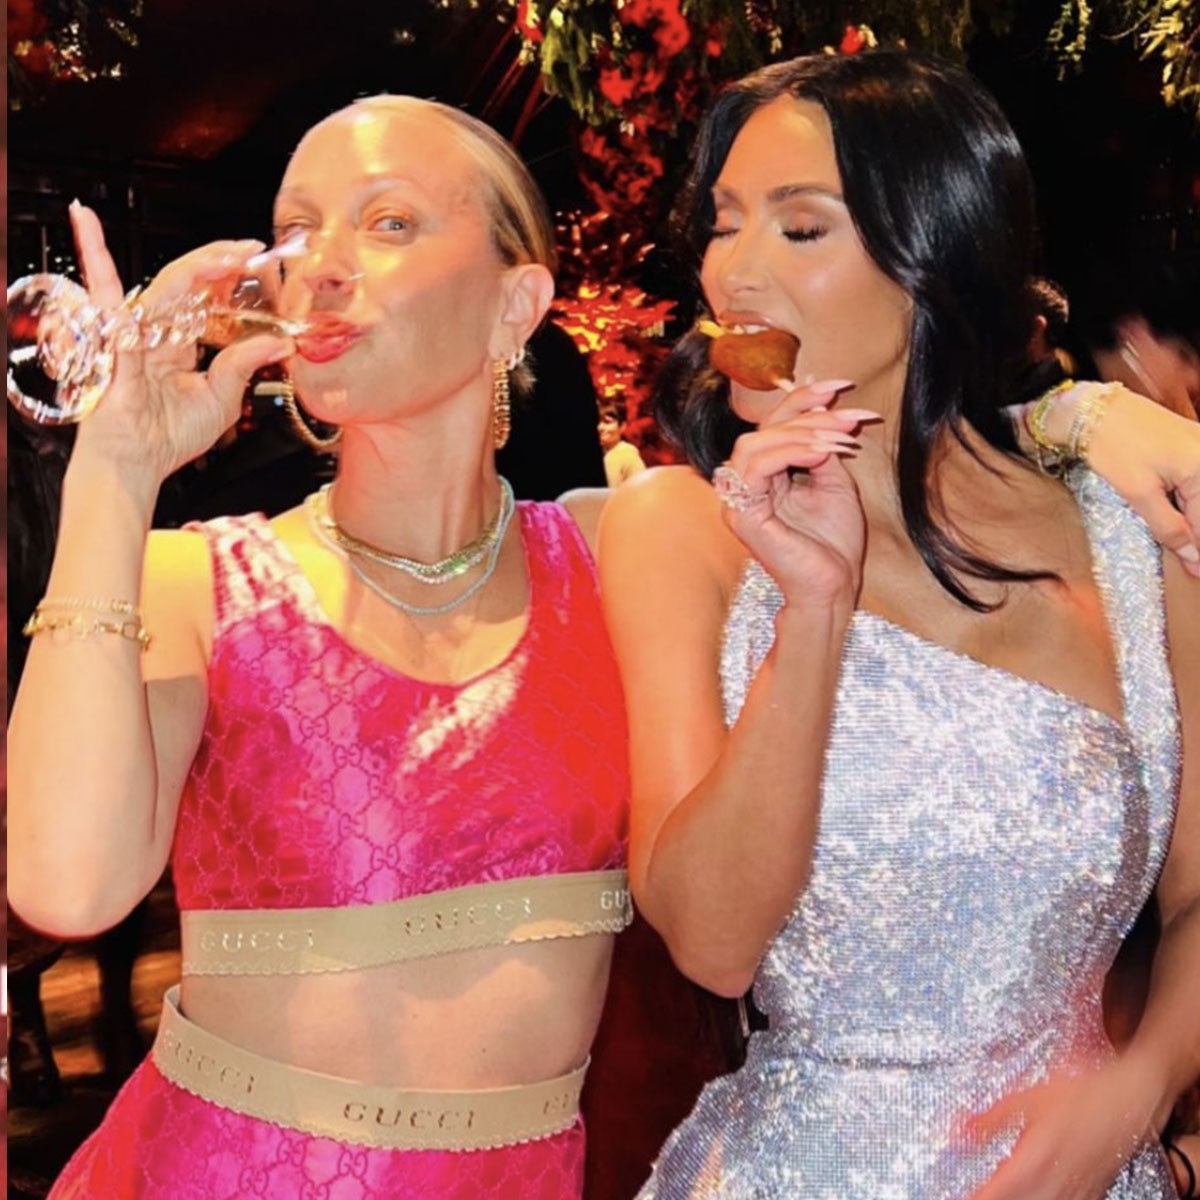 Every Detail From the Kardashians' Most Iconic Christmas Eve Party Yet